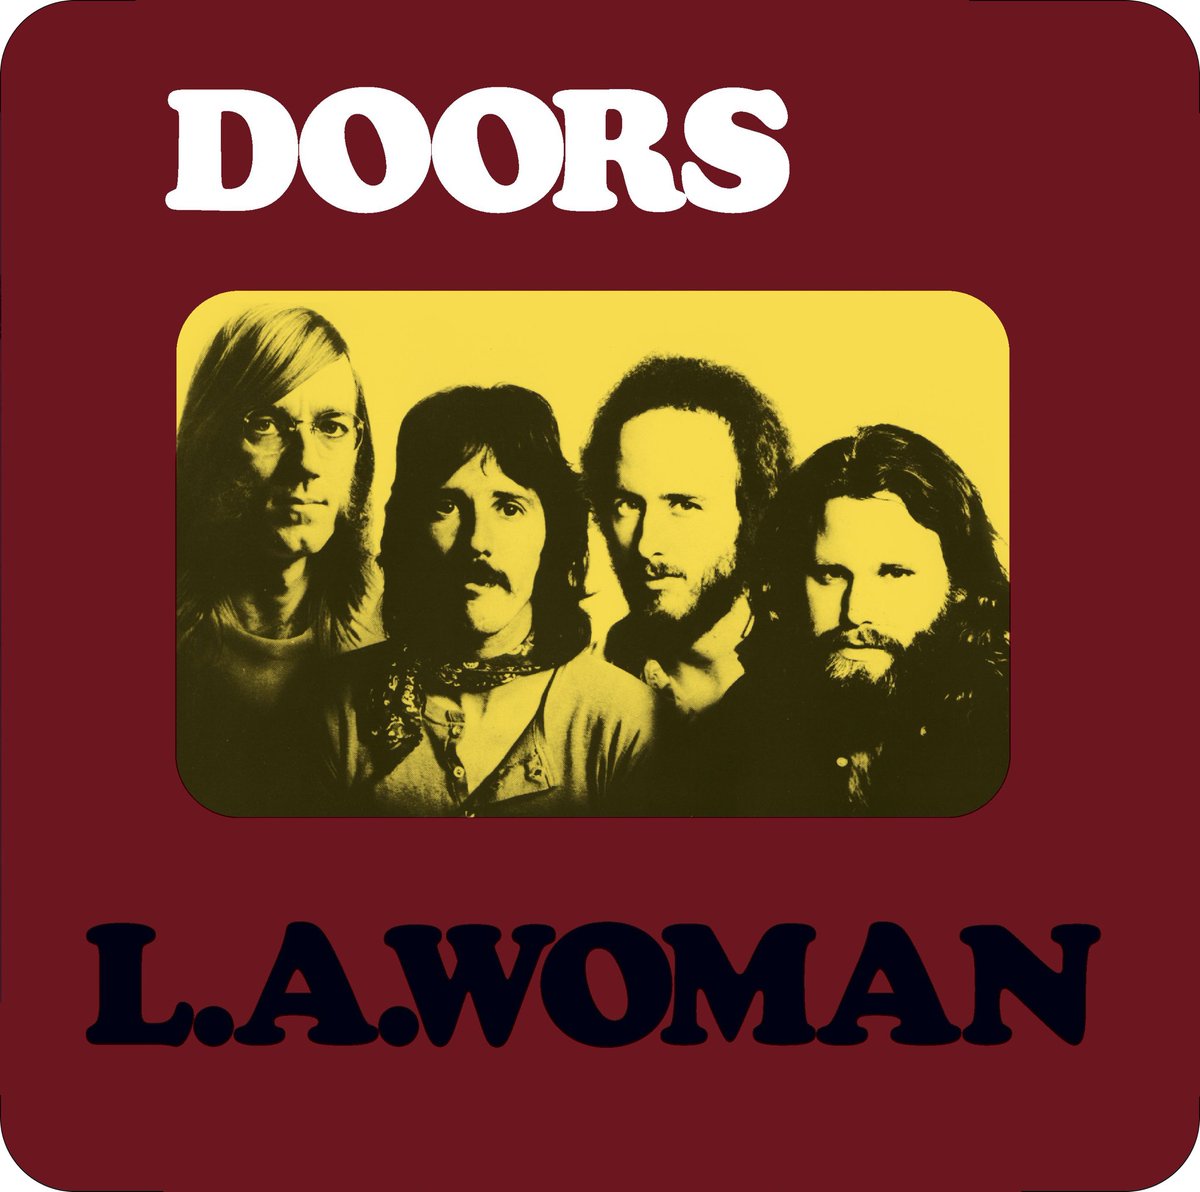 L.A.Woman, The Doors’ sixth and final studio album with Jim Morrison, was released on April 19, 1971. What’s your favorite song on the album? #thedoors #jimmorrison #lawoman